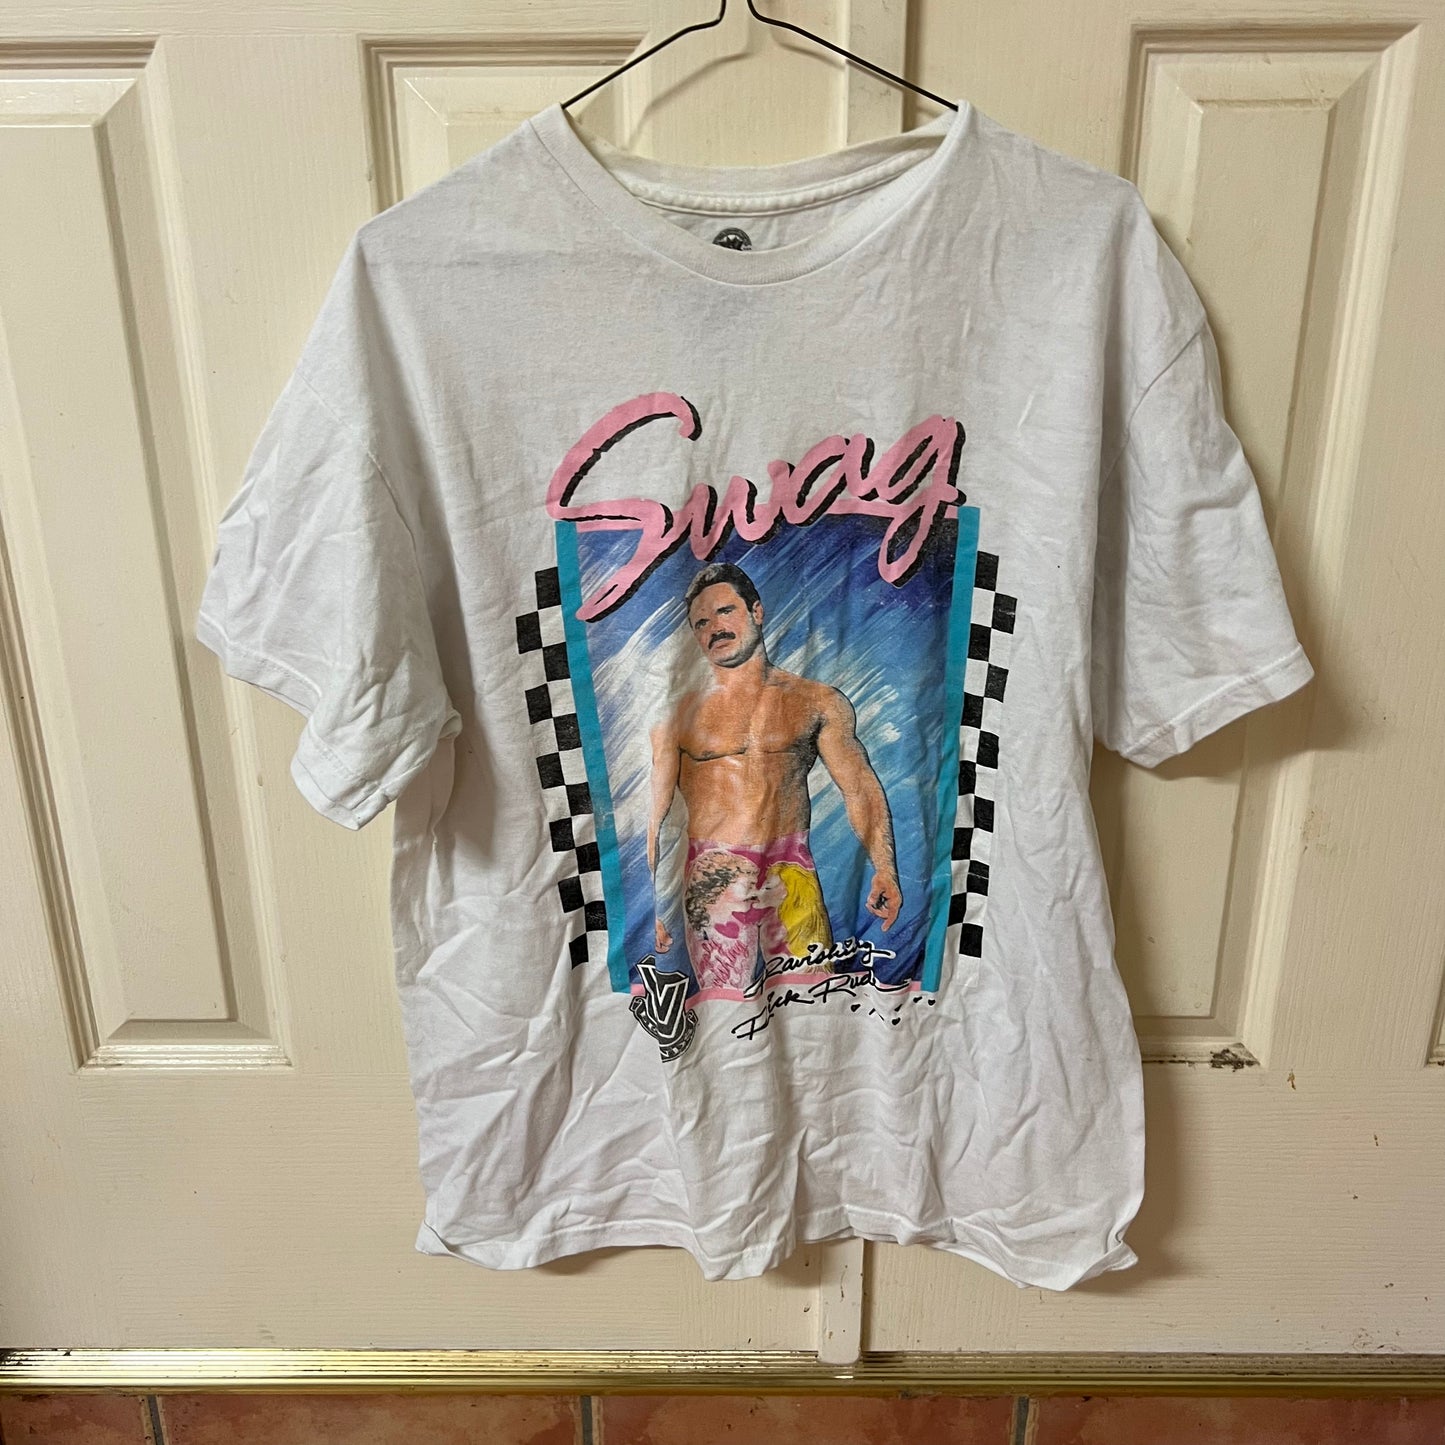 Rick Rude Savage White - Large Size - Official WWE Shirt